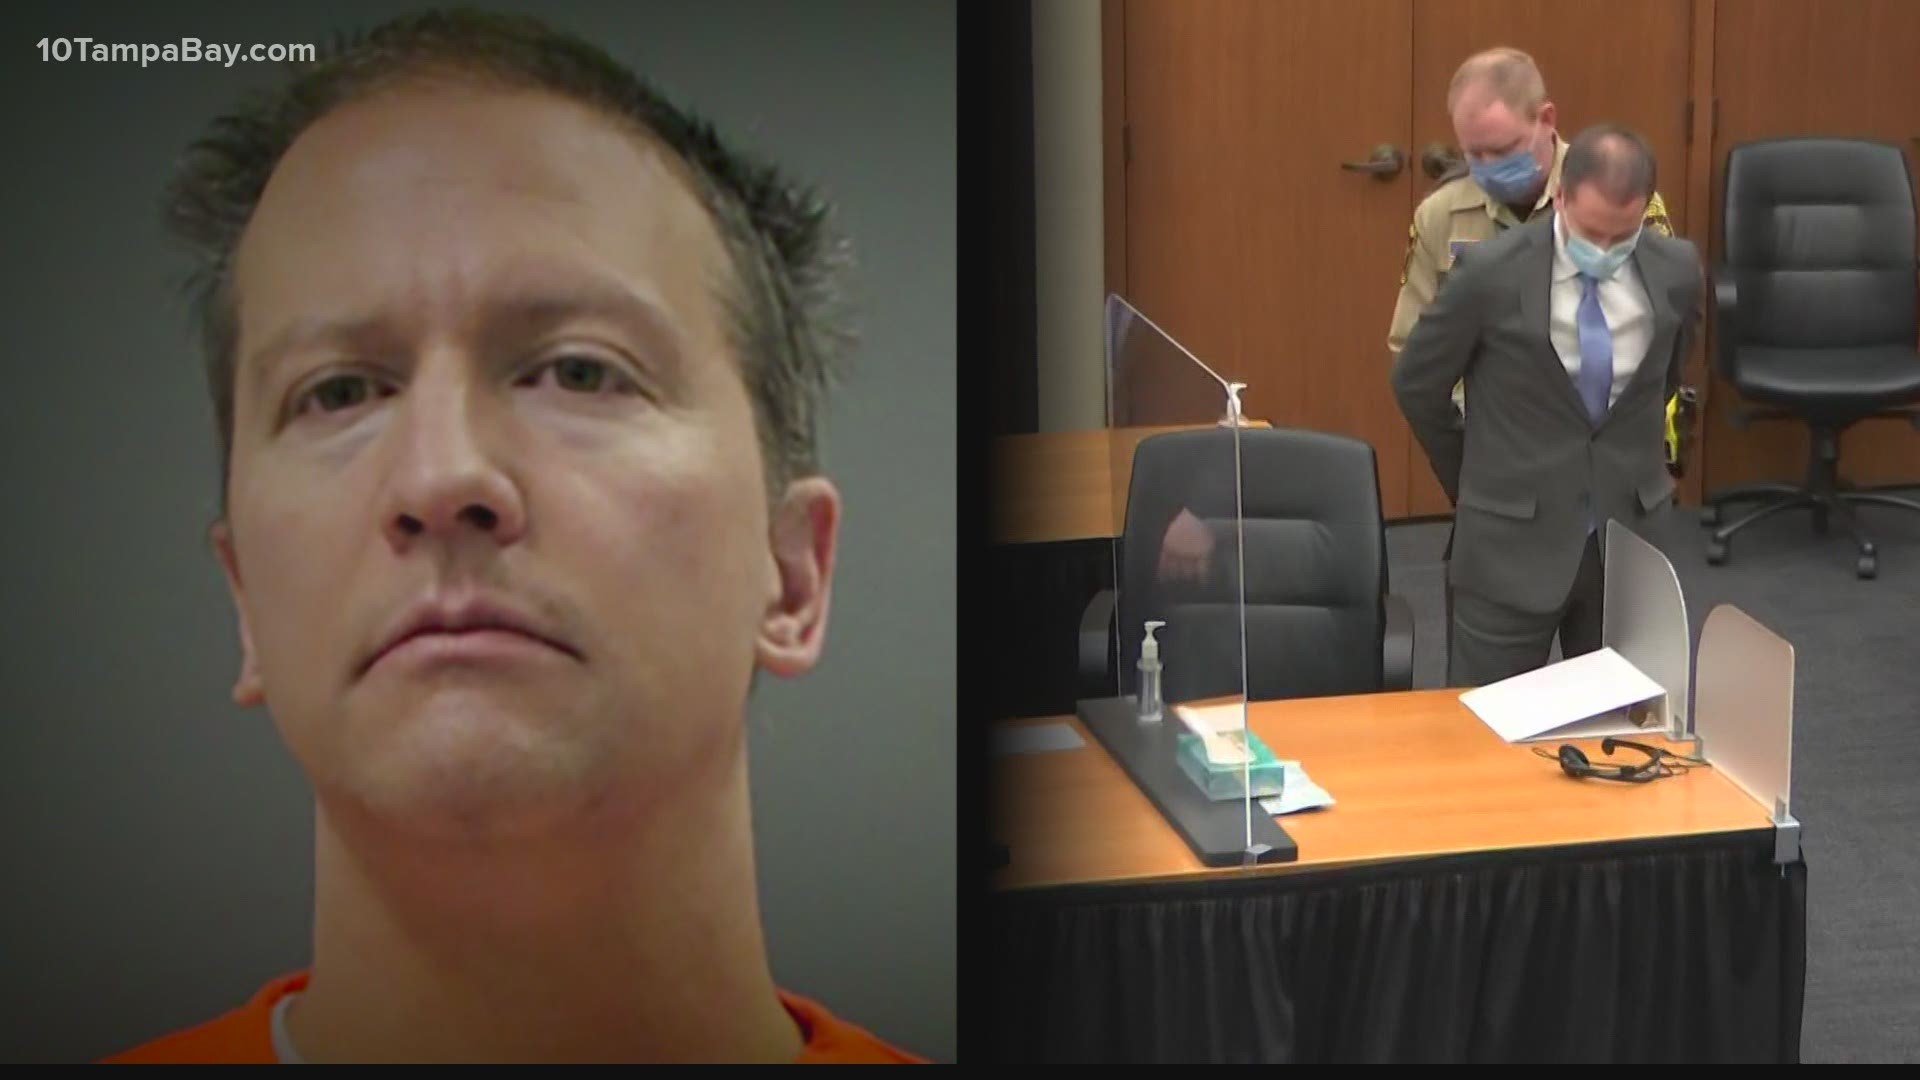 There are still many questions surrounding the recent conviction of ex-Minnesota officer Derek Chauvin, including how many years he will sit in prison.